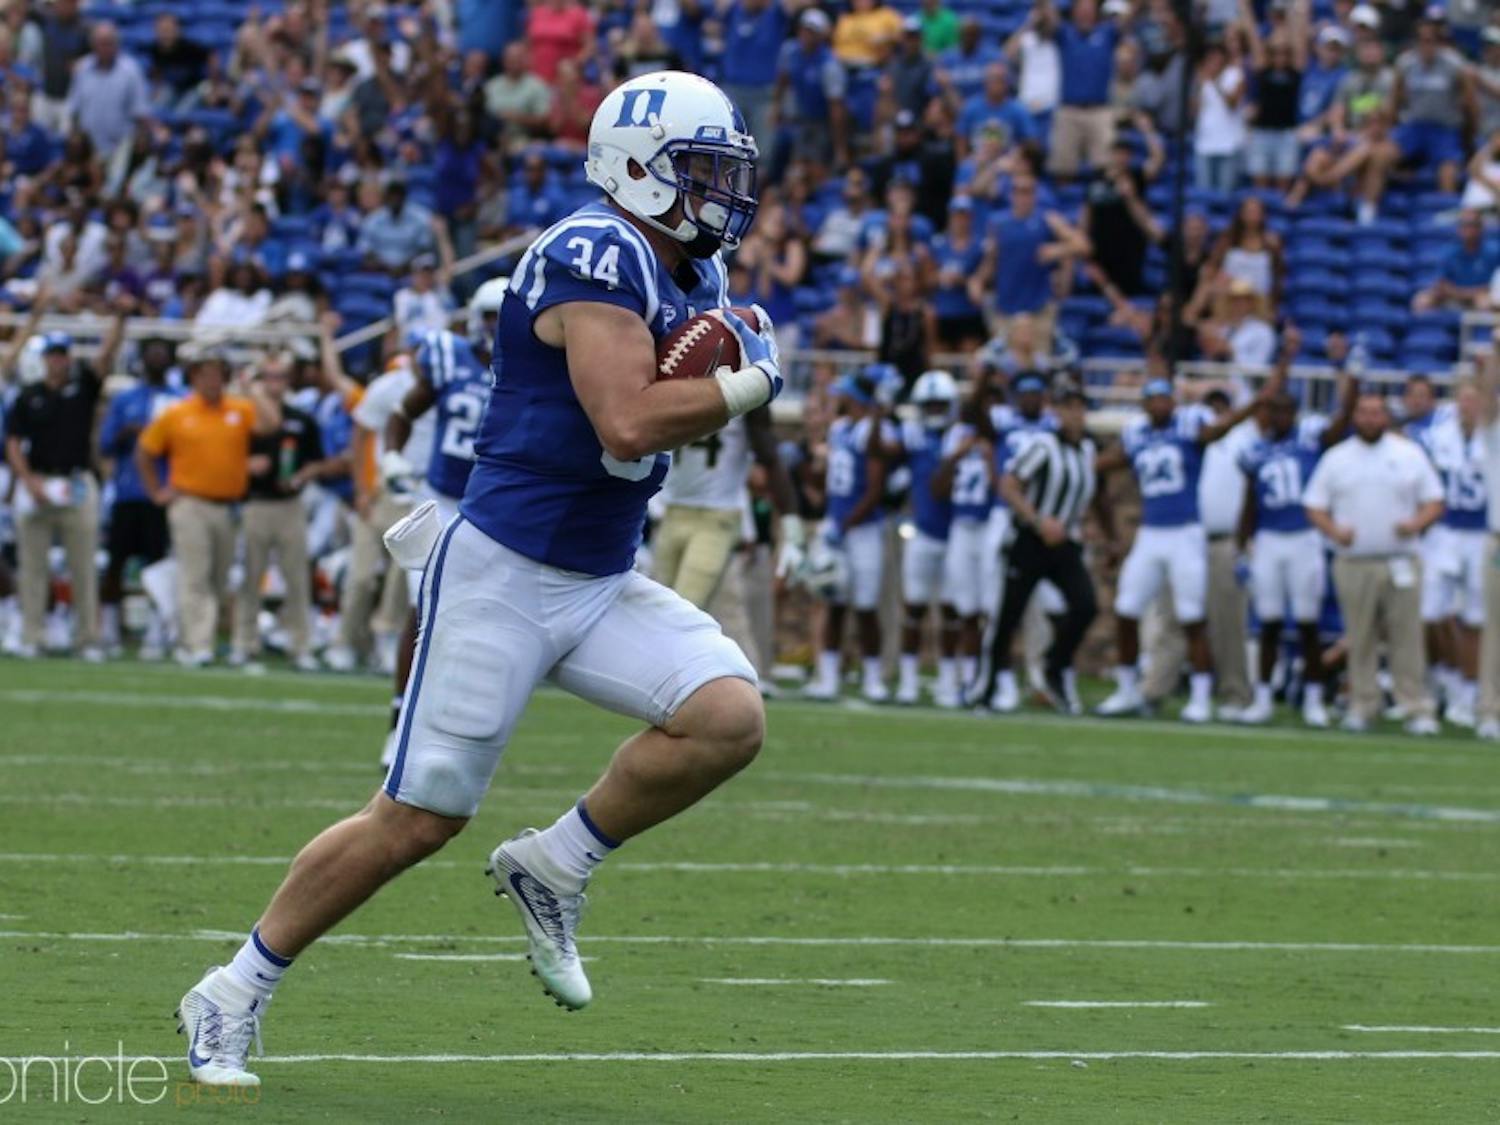 Ben Humphreys returned an interception 22 yards for a touchdown to key Duke's 34-20 win against Baylor. 